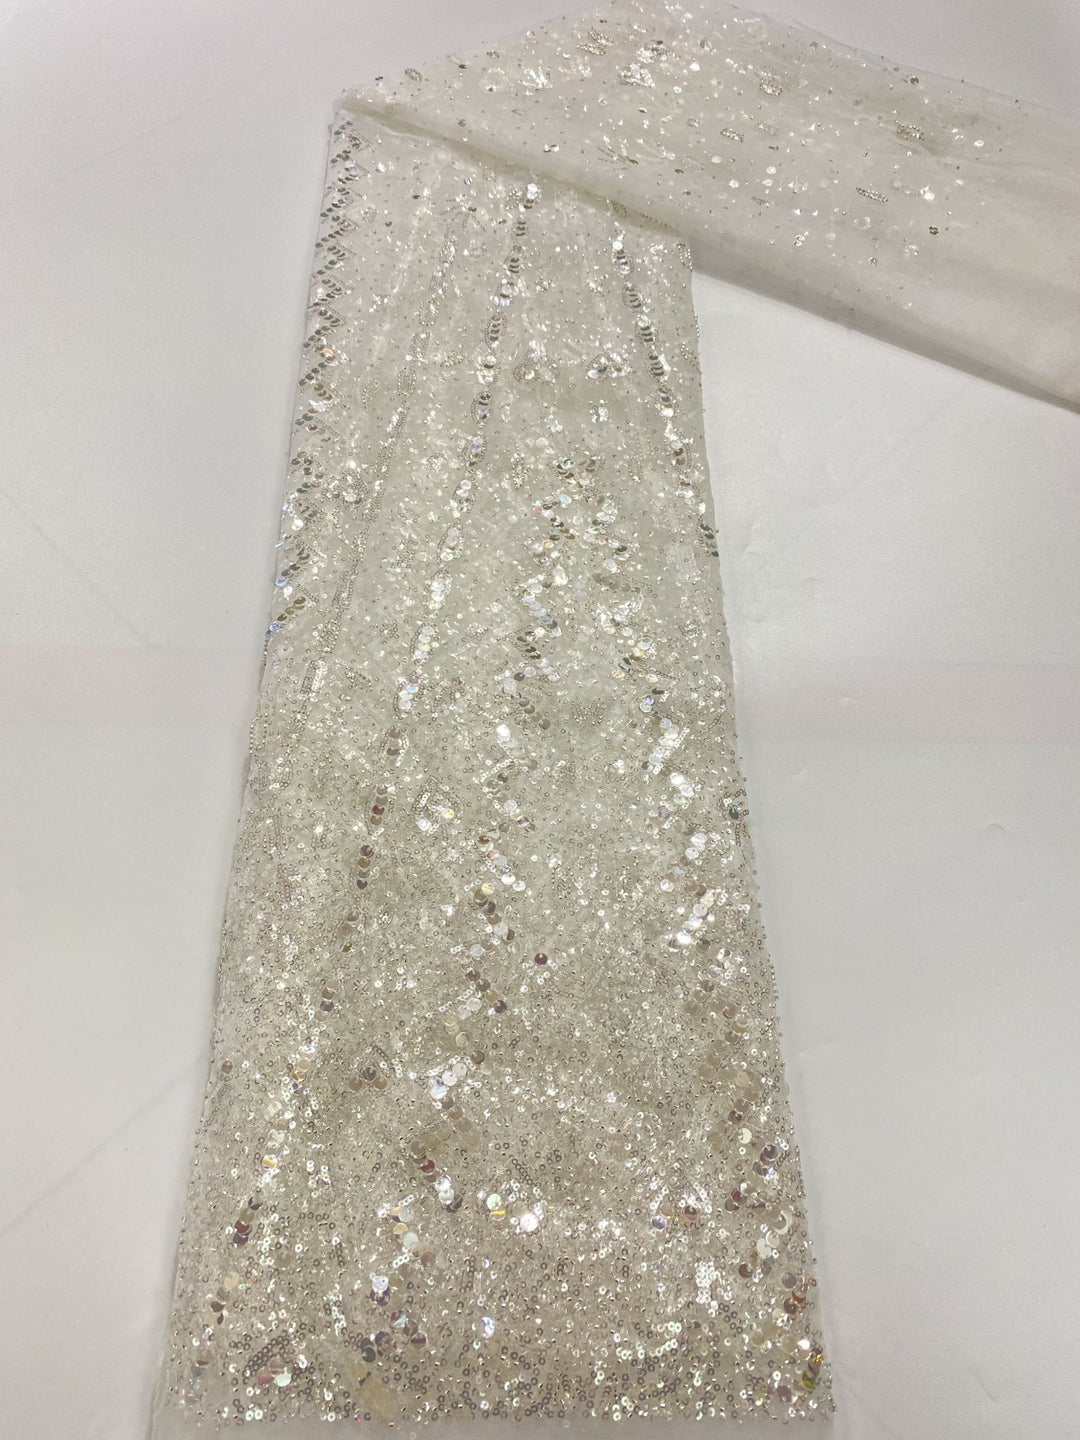 5 YARDS / 15 COLORS / Floral Beaded Embroidery Glitter Mesh Lace Wedding Party Dress Fabric - Classic & Modern